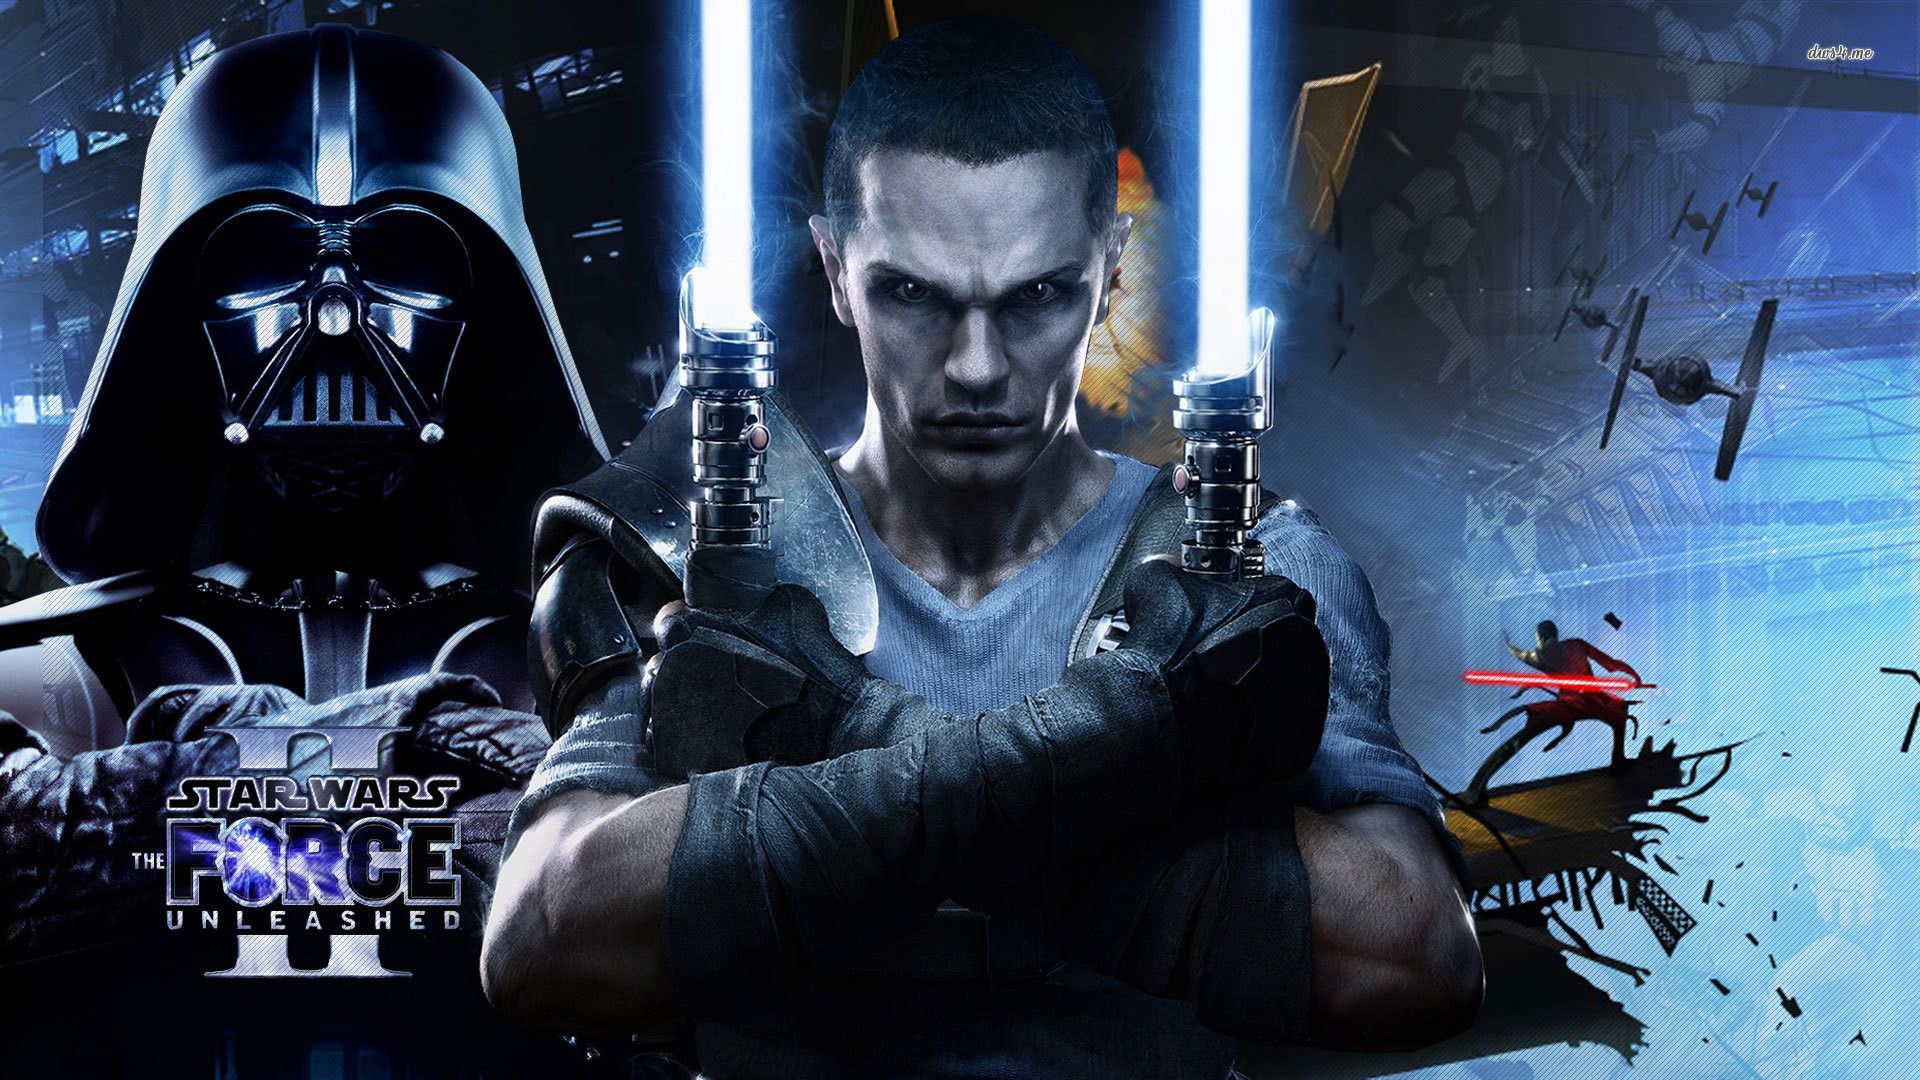 Starkiller And Darth Vader In Star Wars Wars The Force Unleashed Wallpaper HD